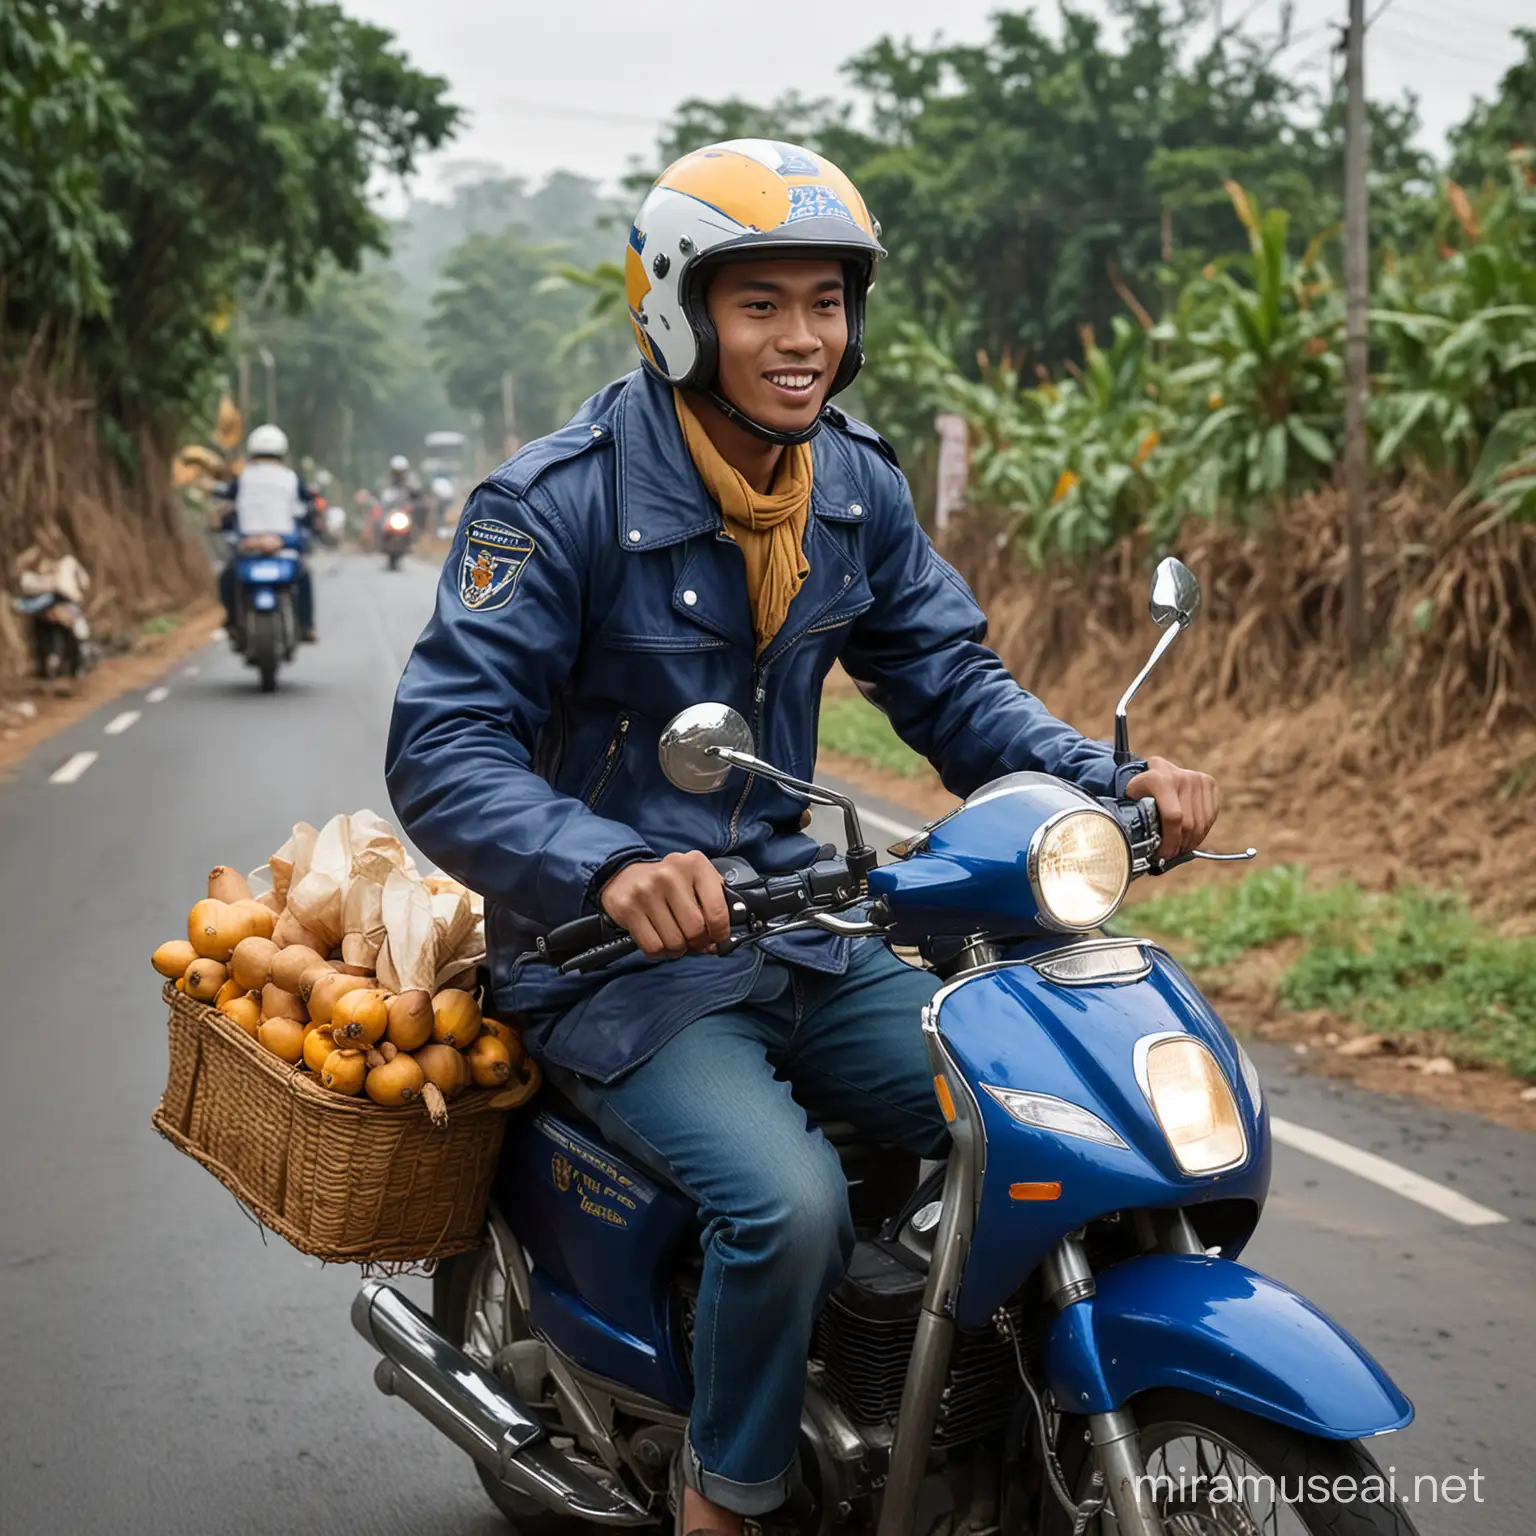 Young Indonesian Man Riding Blue Motorcycle with Herbal Bundle